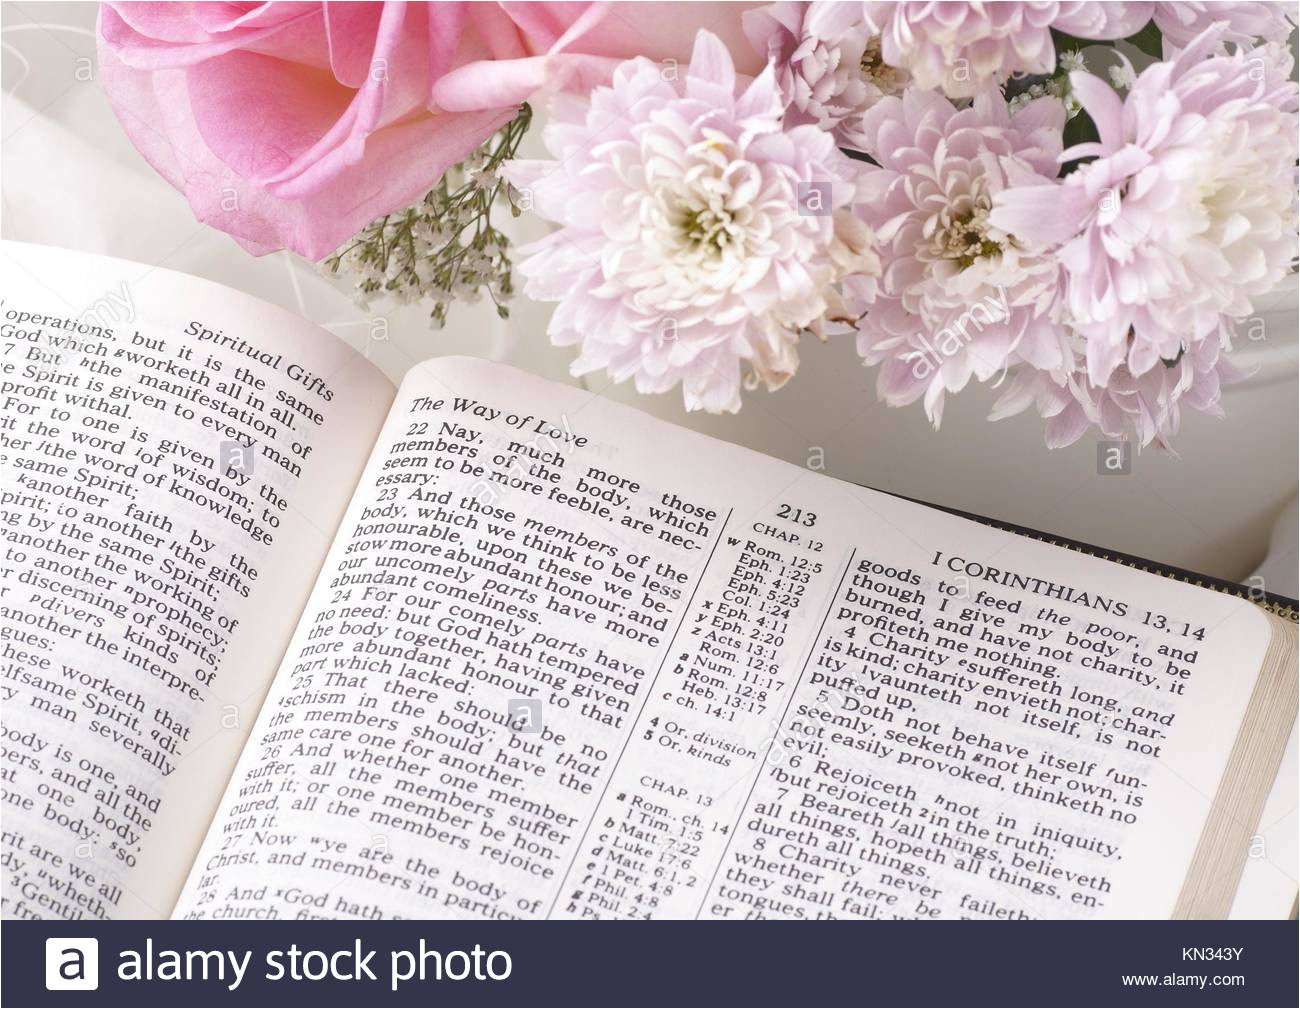 holy bible and flowers stock image